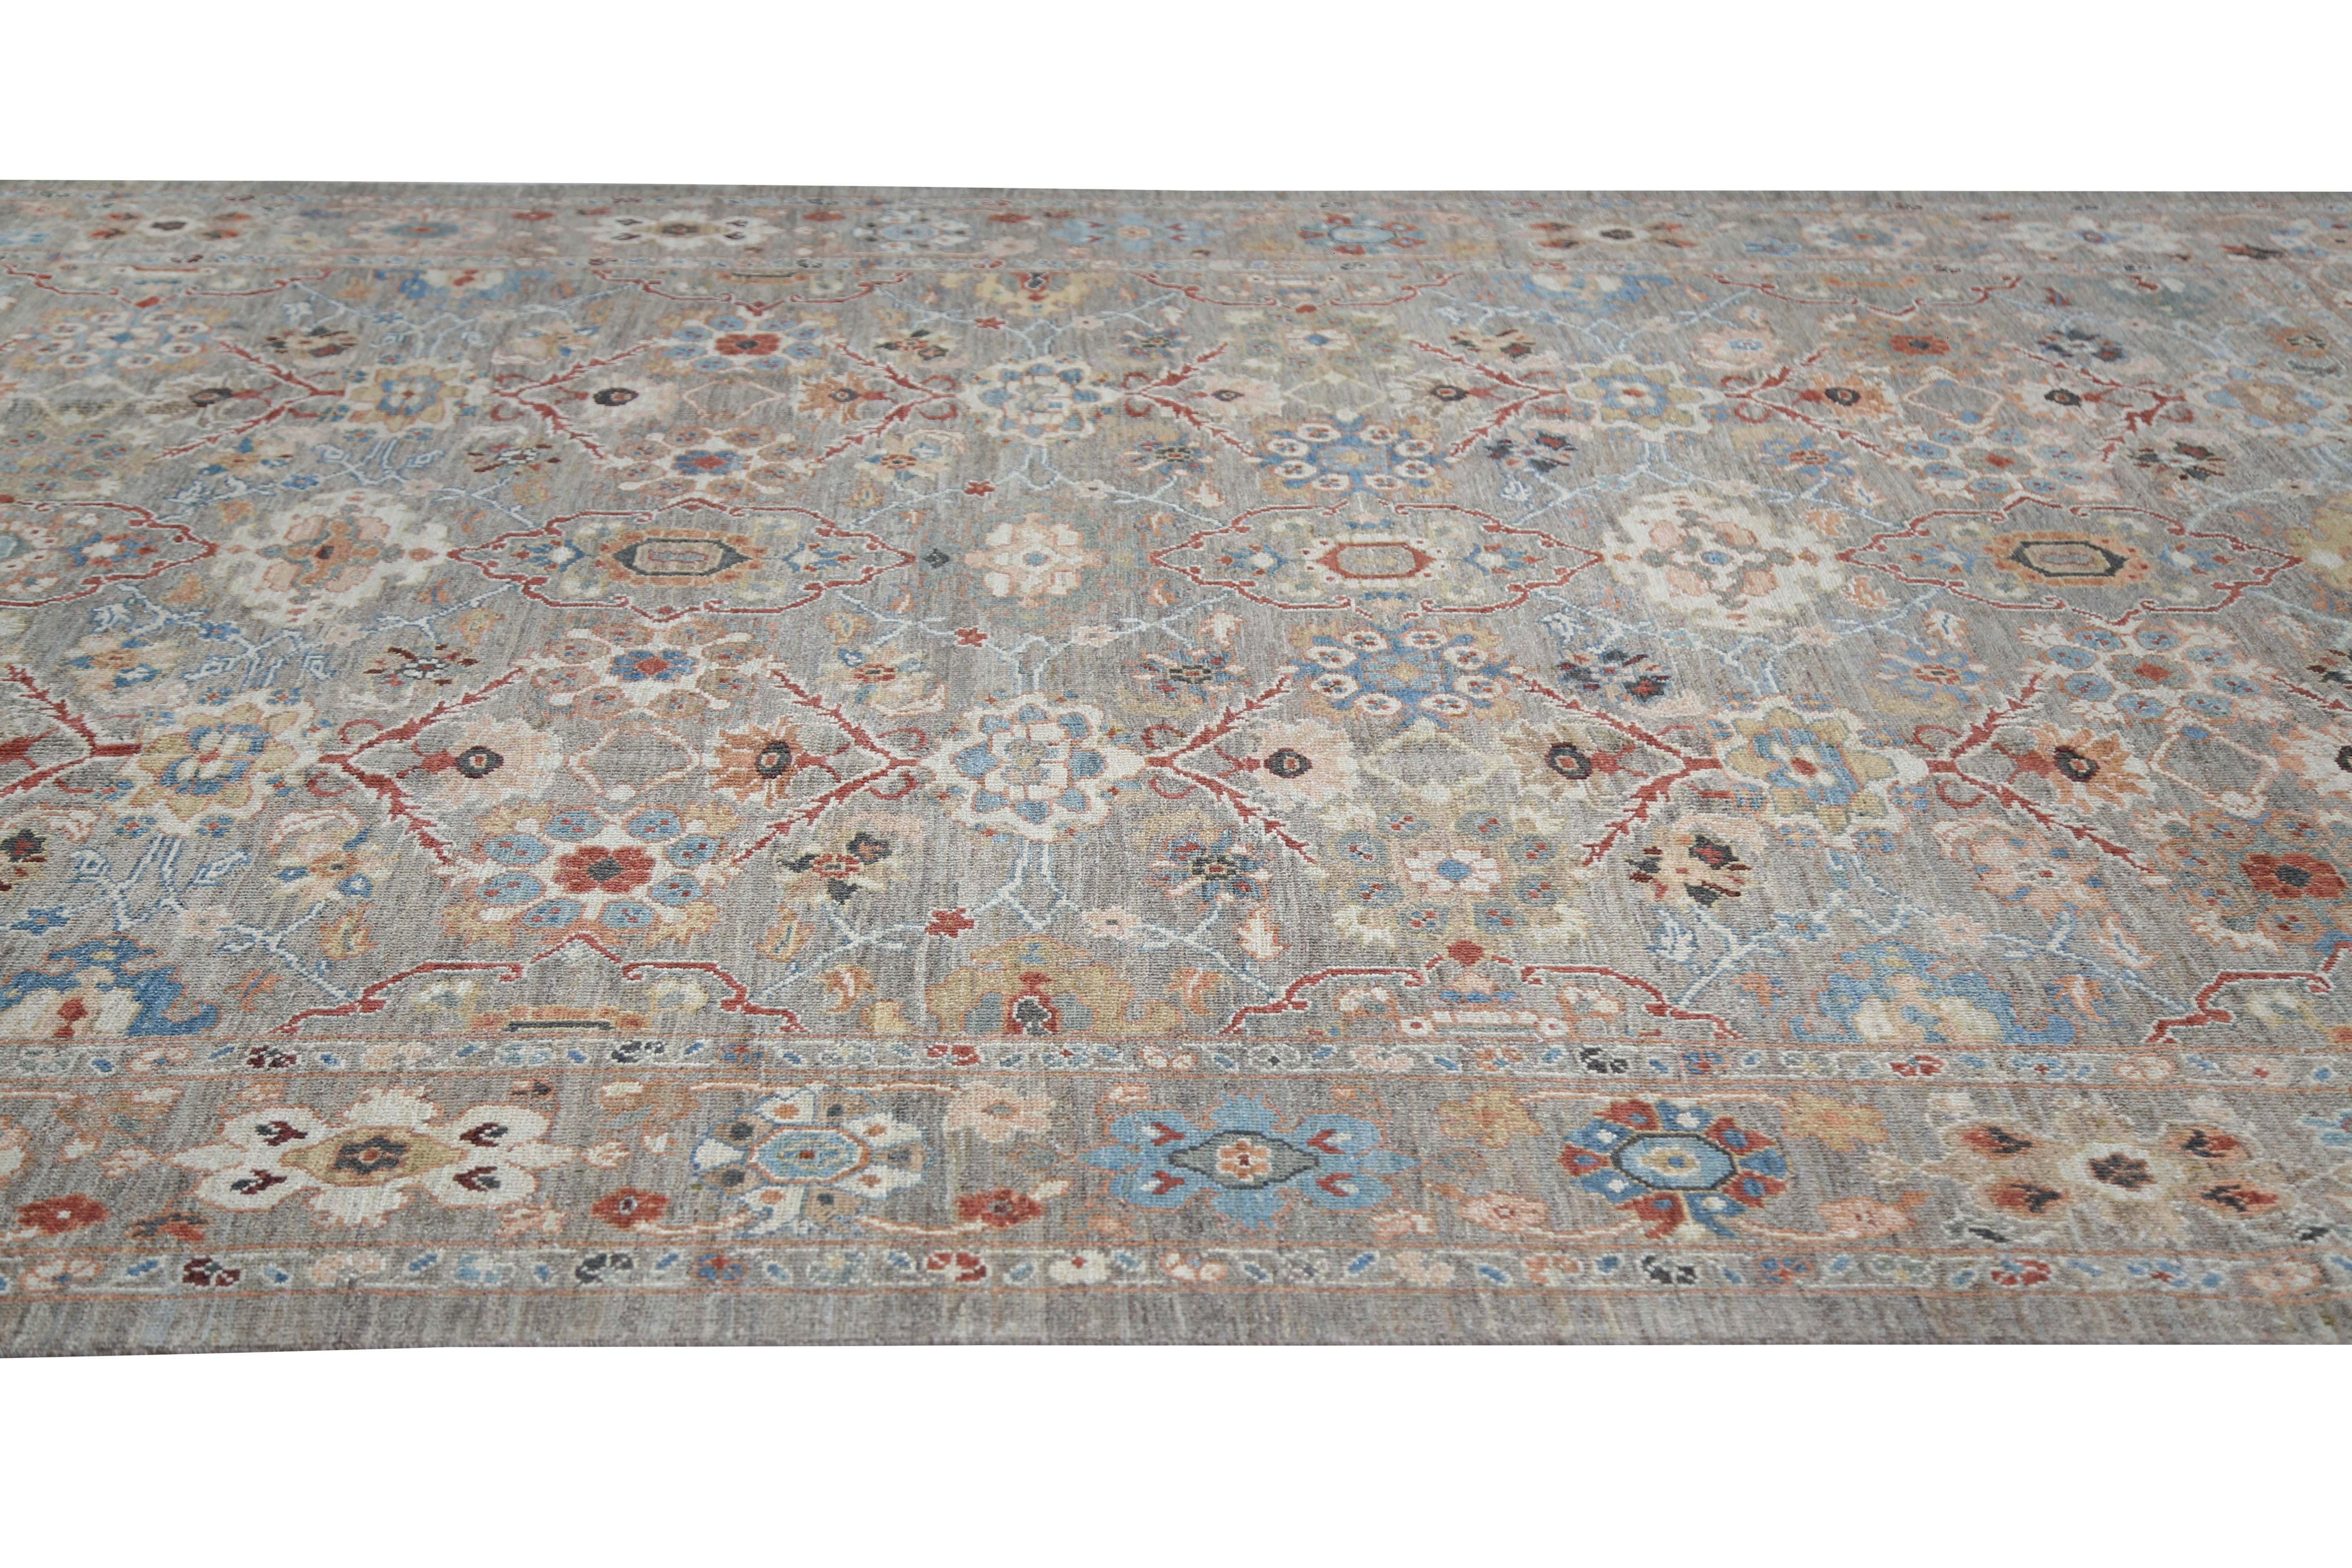 Exquisite Detailed Sultanabad Rug Design In New Condition For Sale In Dallas, TX